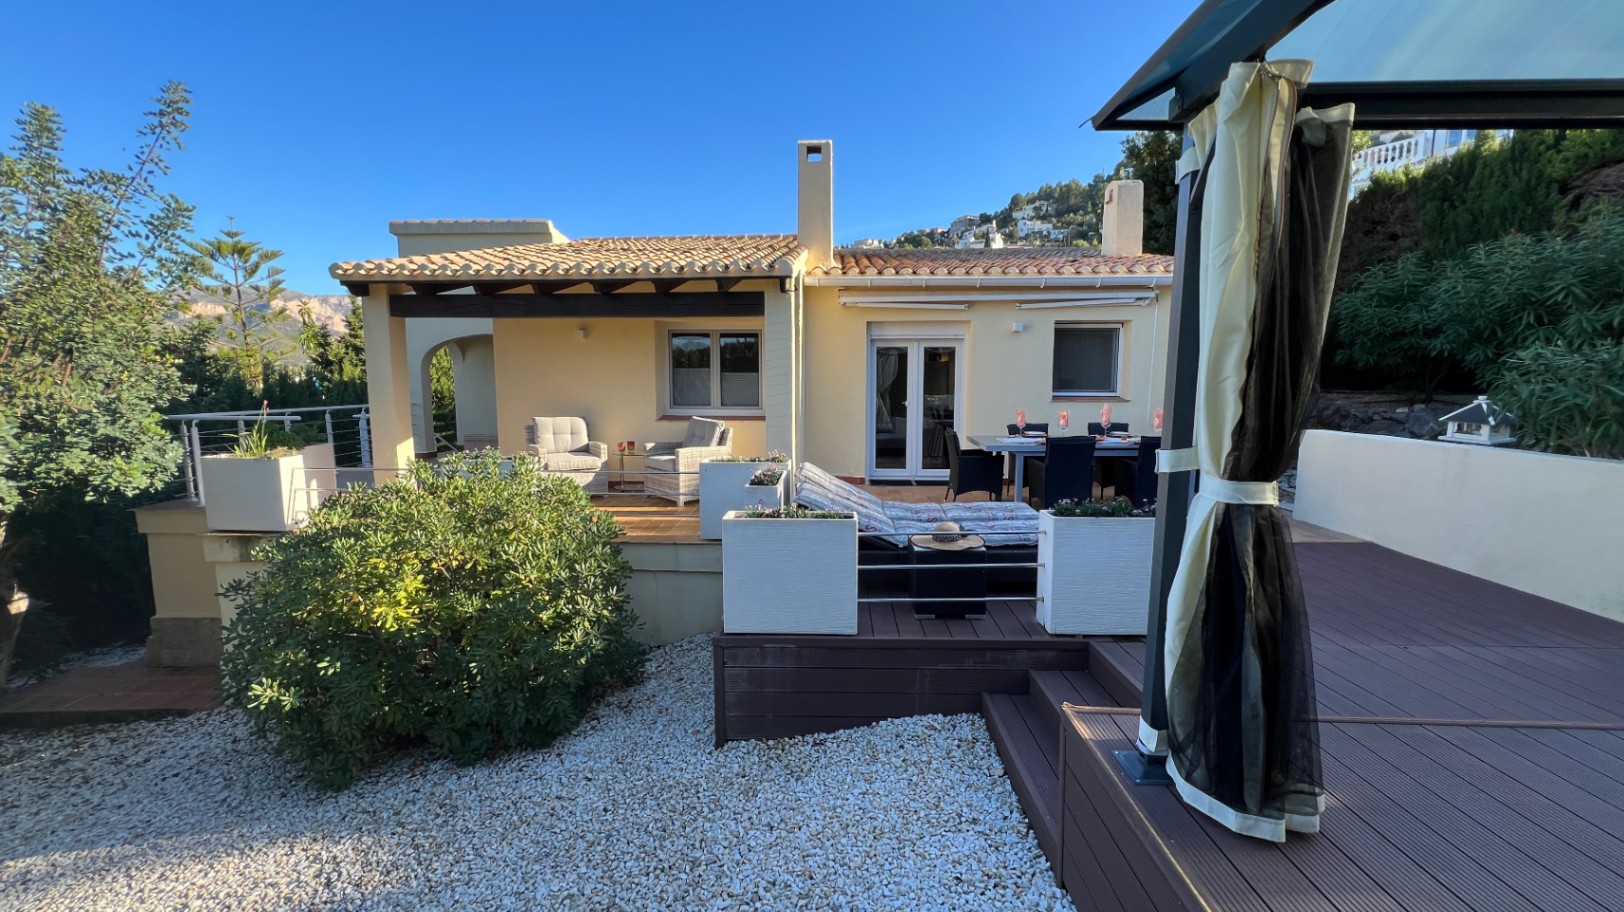 Beautifully renovated detached villa with private garden, car park and roof terrace in La Sella